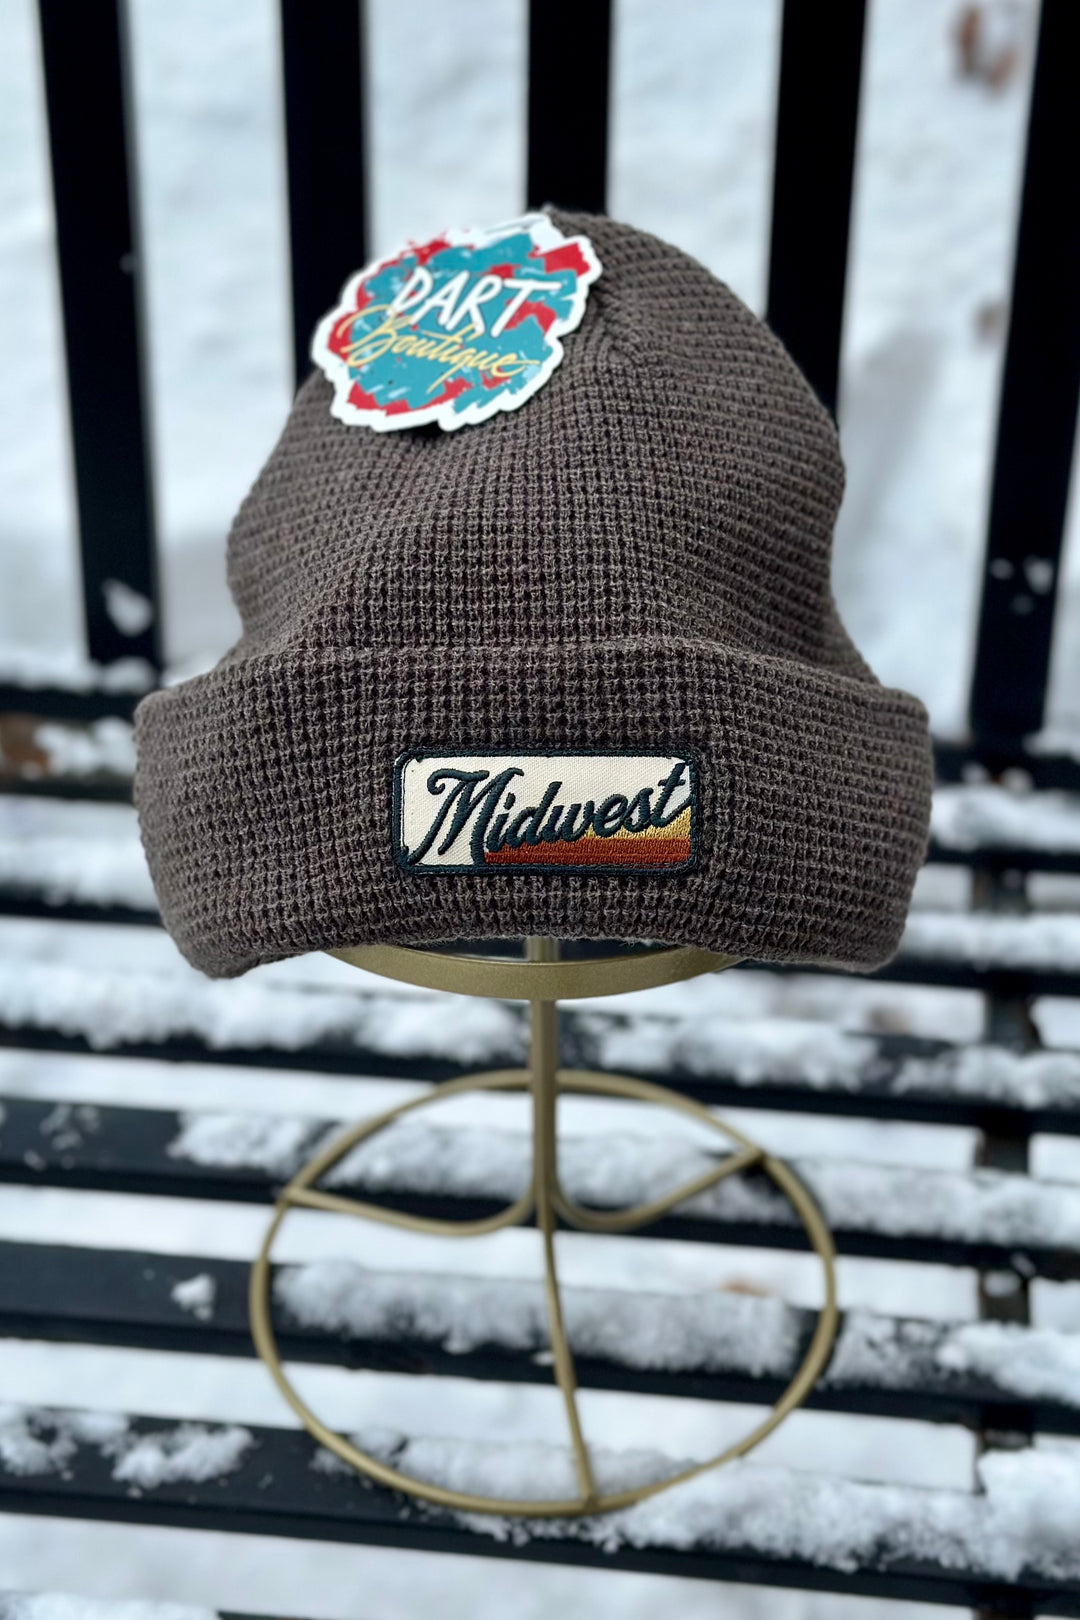 Retro Midwest Patch Beanie